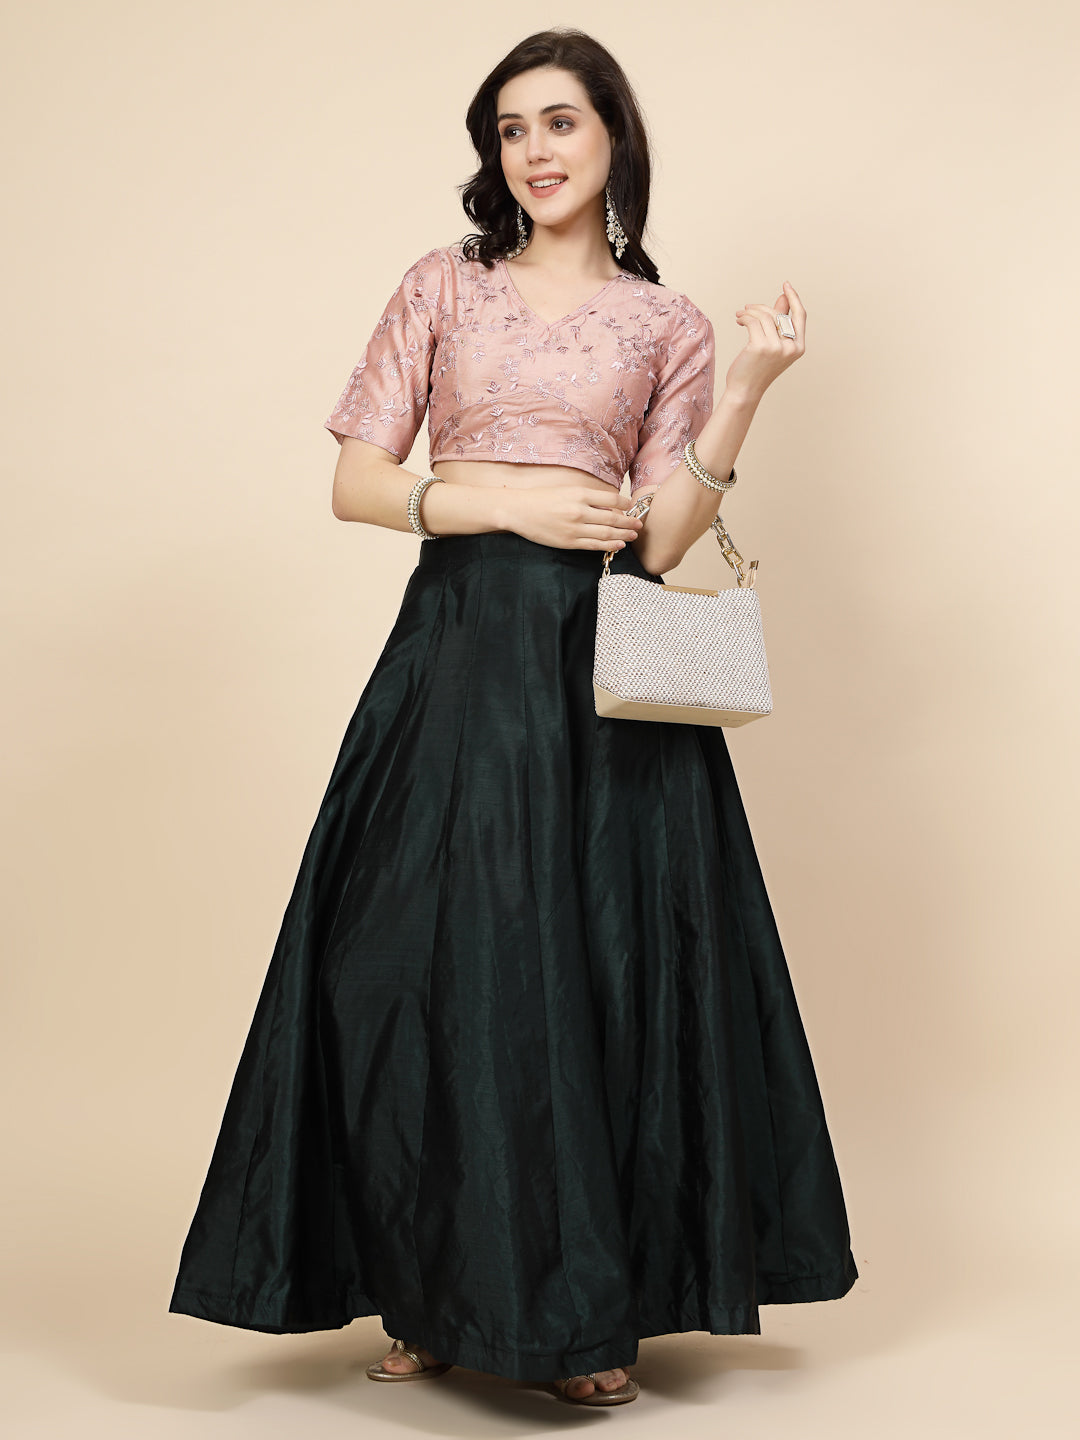 Women Peach Color Embroidery Top